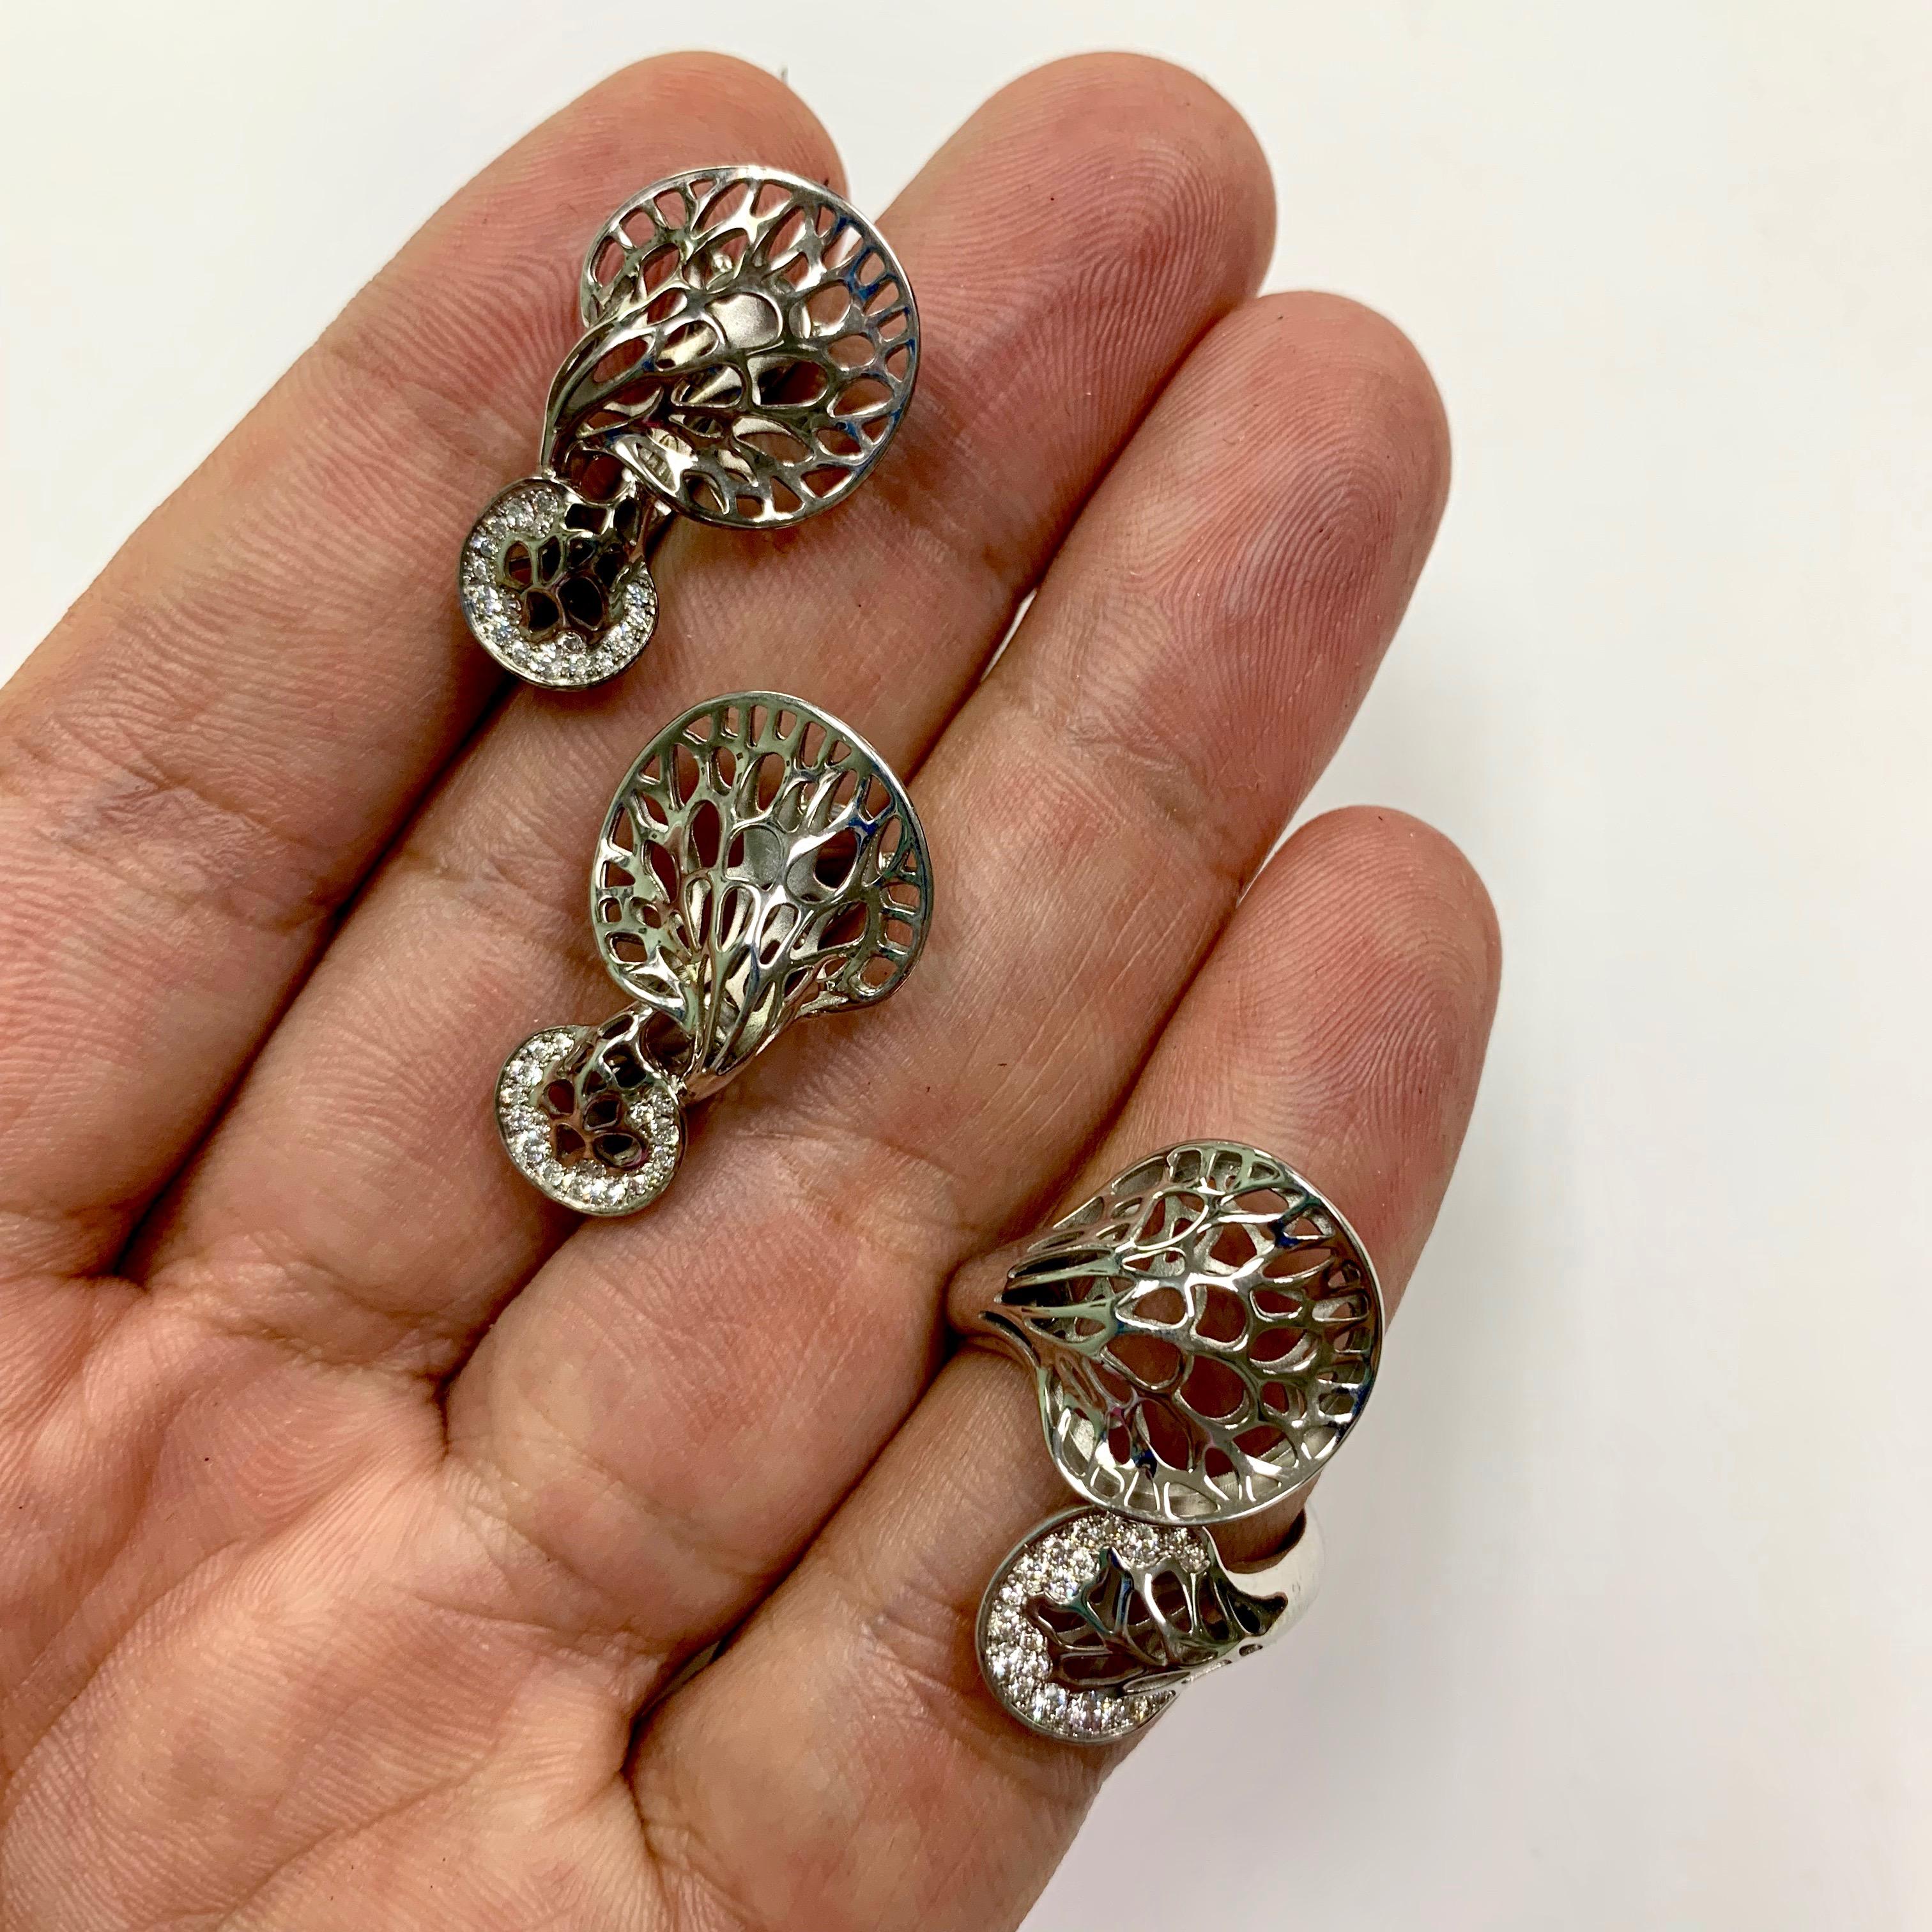 Diamonds 18 Karat White Gold Tree Mushroom Ring Earrings Suite
We present to your attention a Suite from our Tresure Forest Collection in the form of a tree mushroom. White 18 Karat Gold Suite has an abnormal deeply cracked shape which was created,